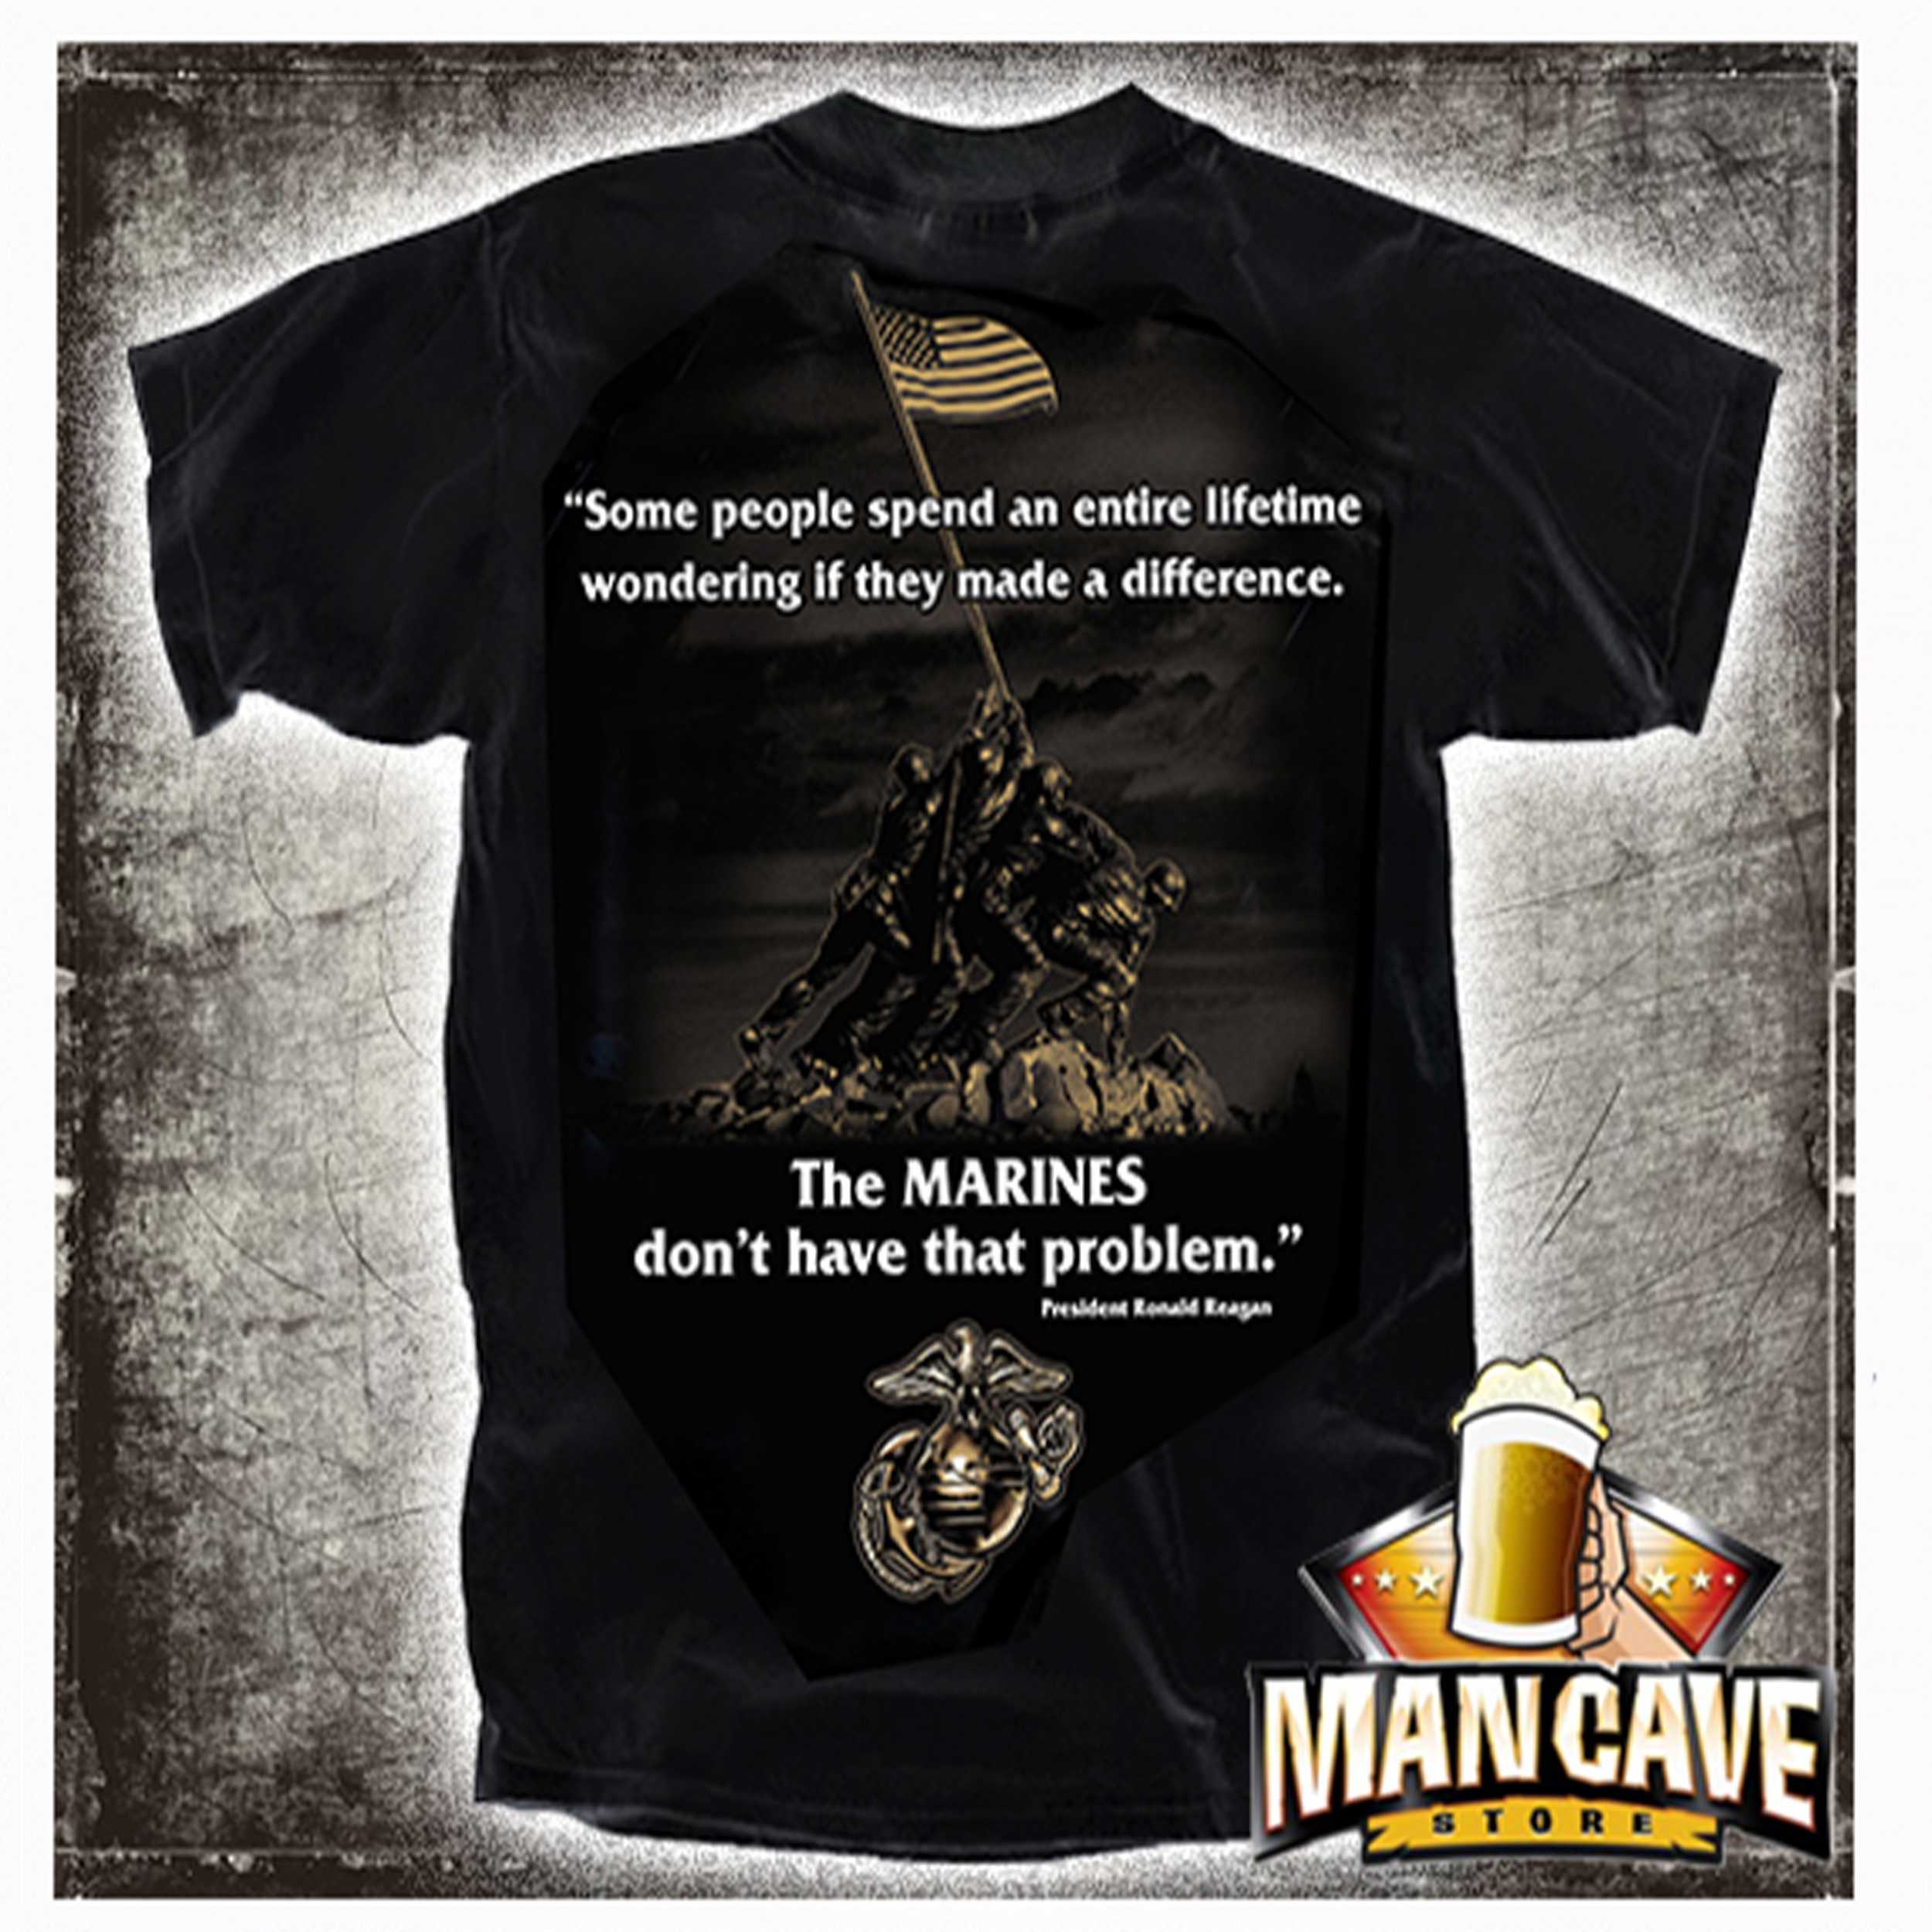 Marines Make a Difference T-shirt